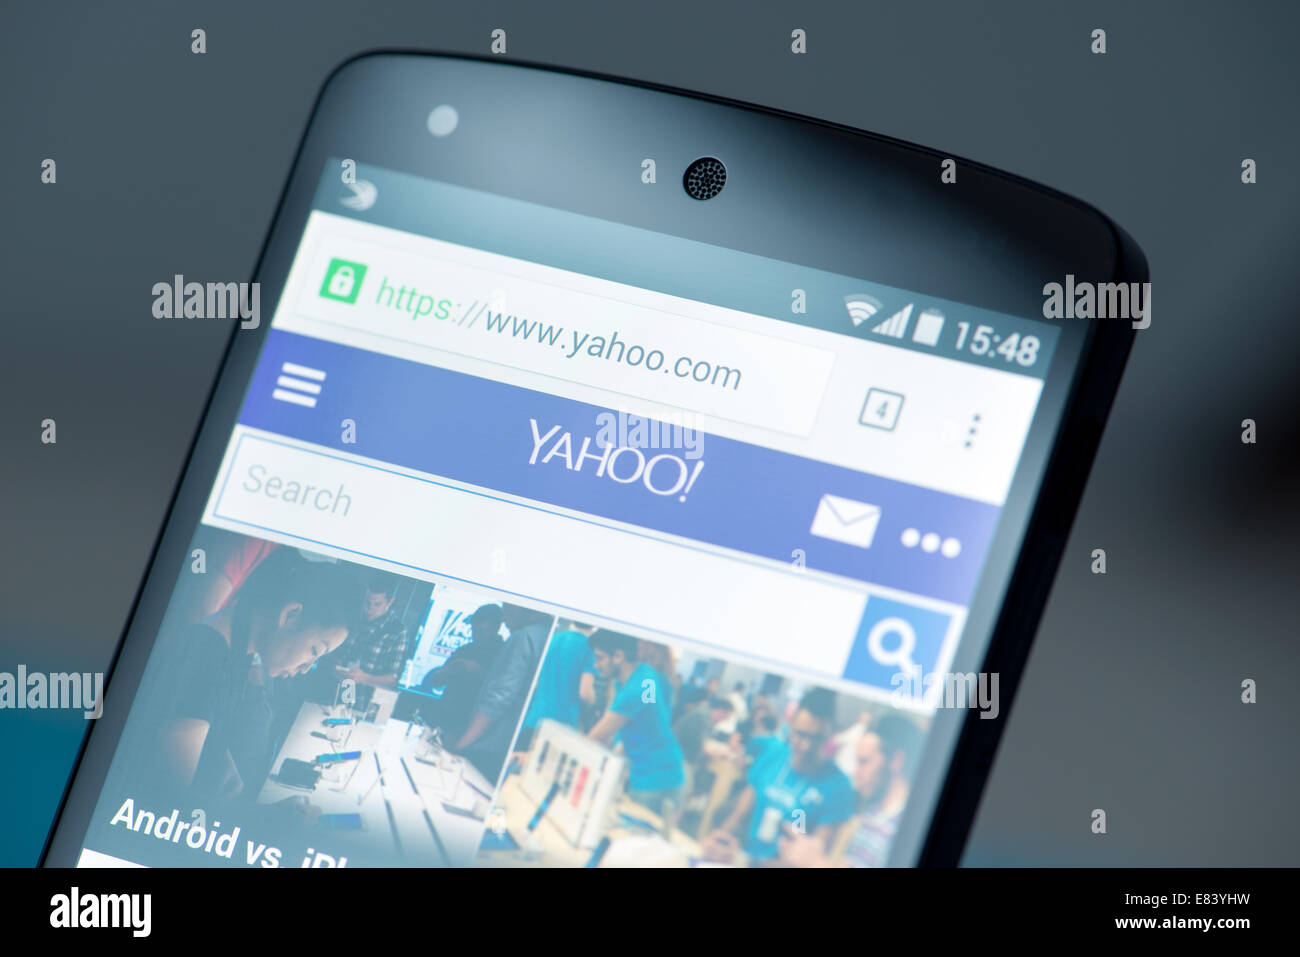 Close-up shot of brand new Google Nexus 5, powered by Android 4.4 version, with Yahoo website news page on a screen. Stock Photo